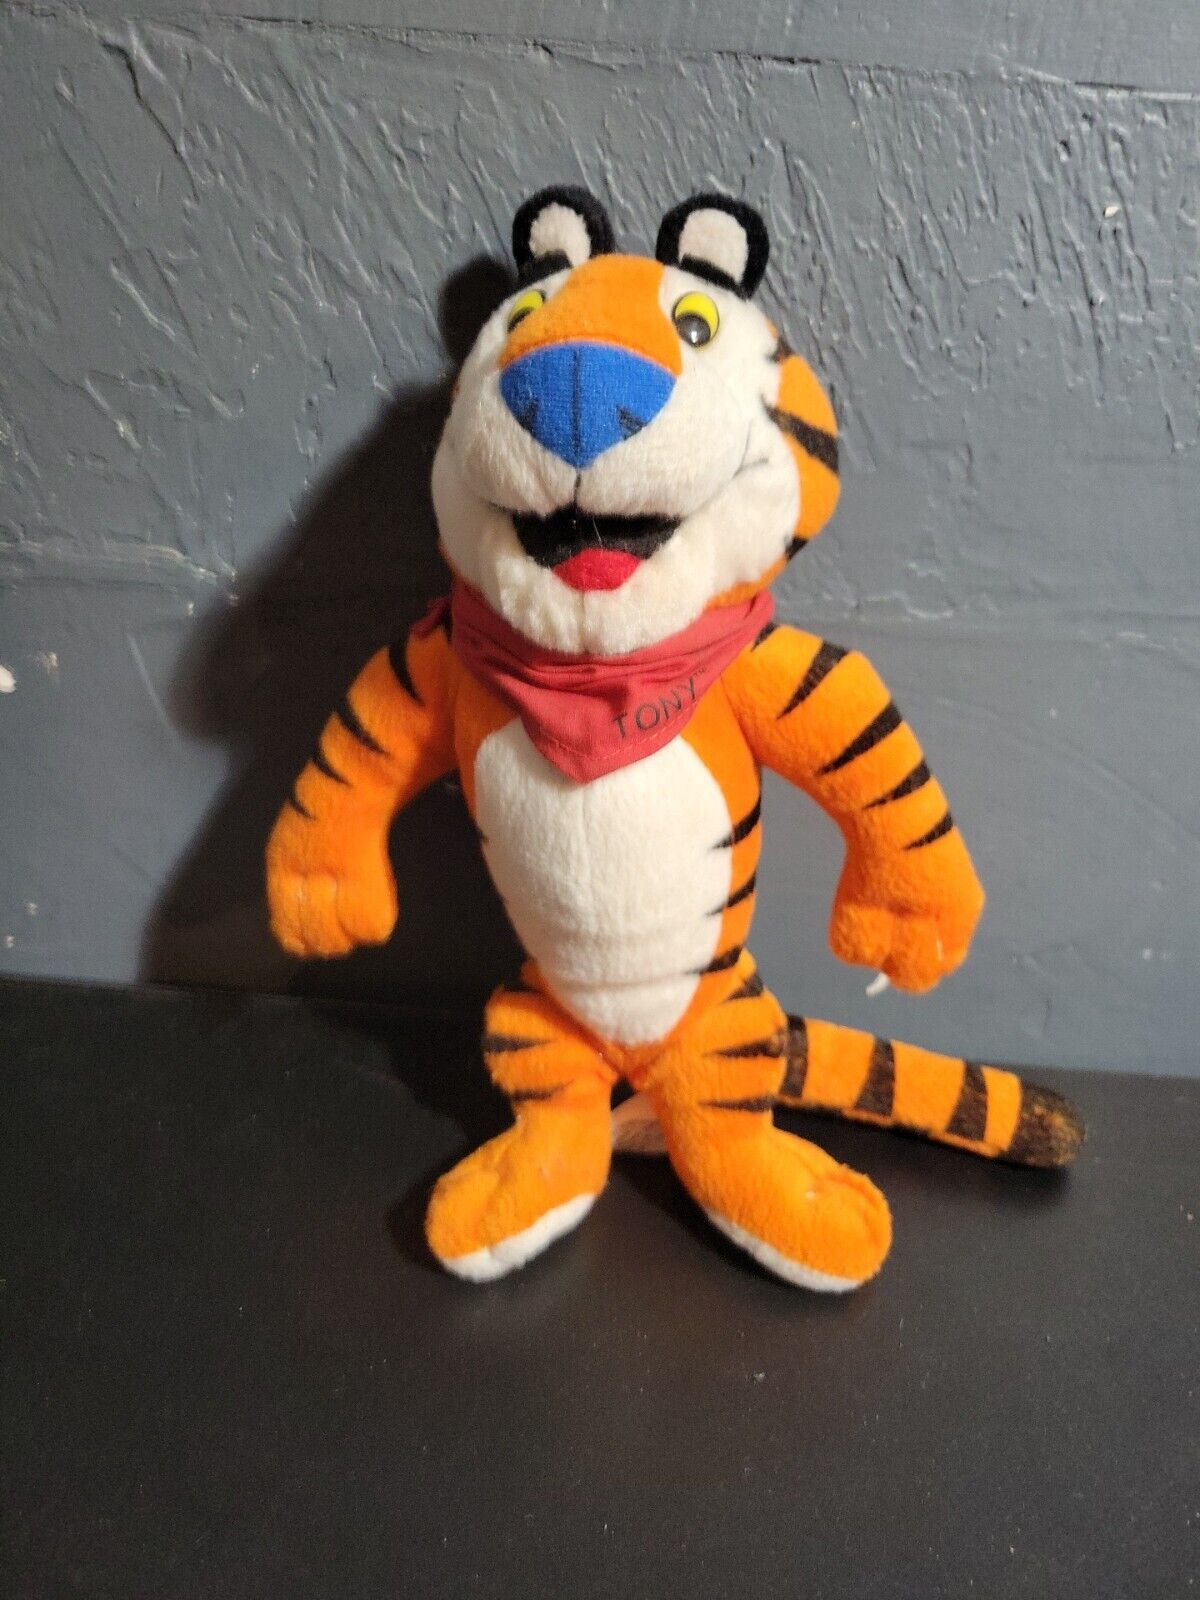 Vintage 1991 1993 Tony the Tiger Frosted Flakes Cereal Plush Stuffed Animal 10”